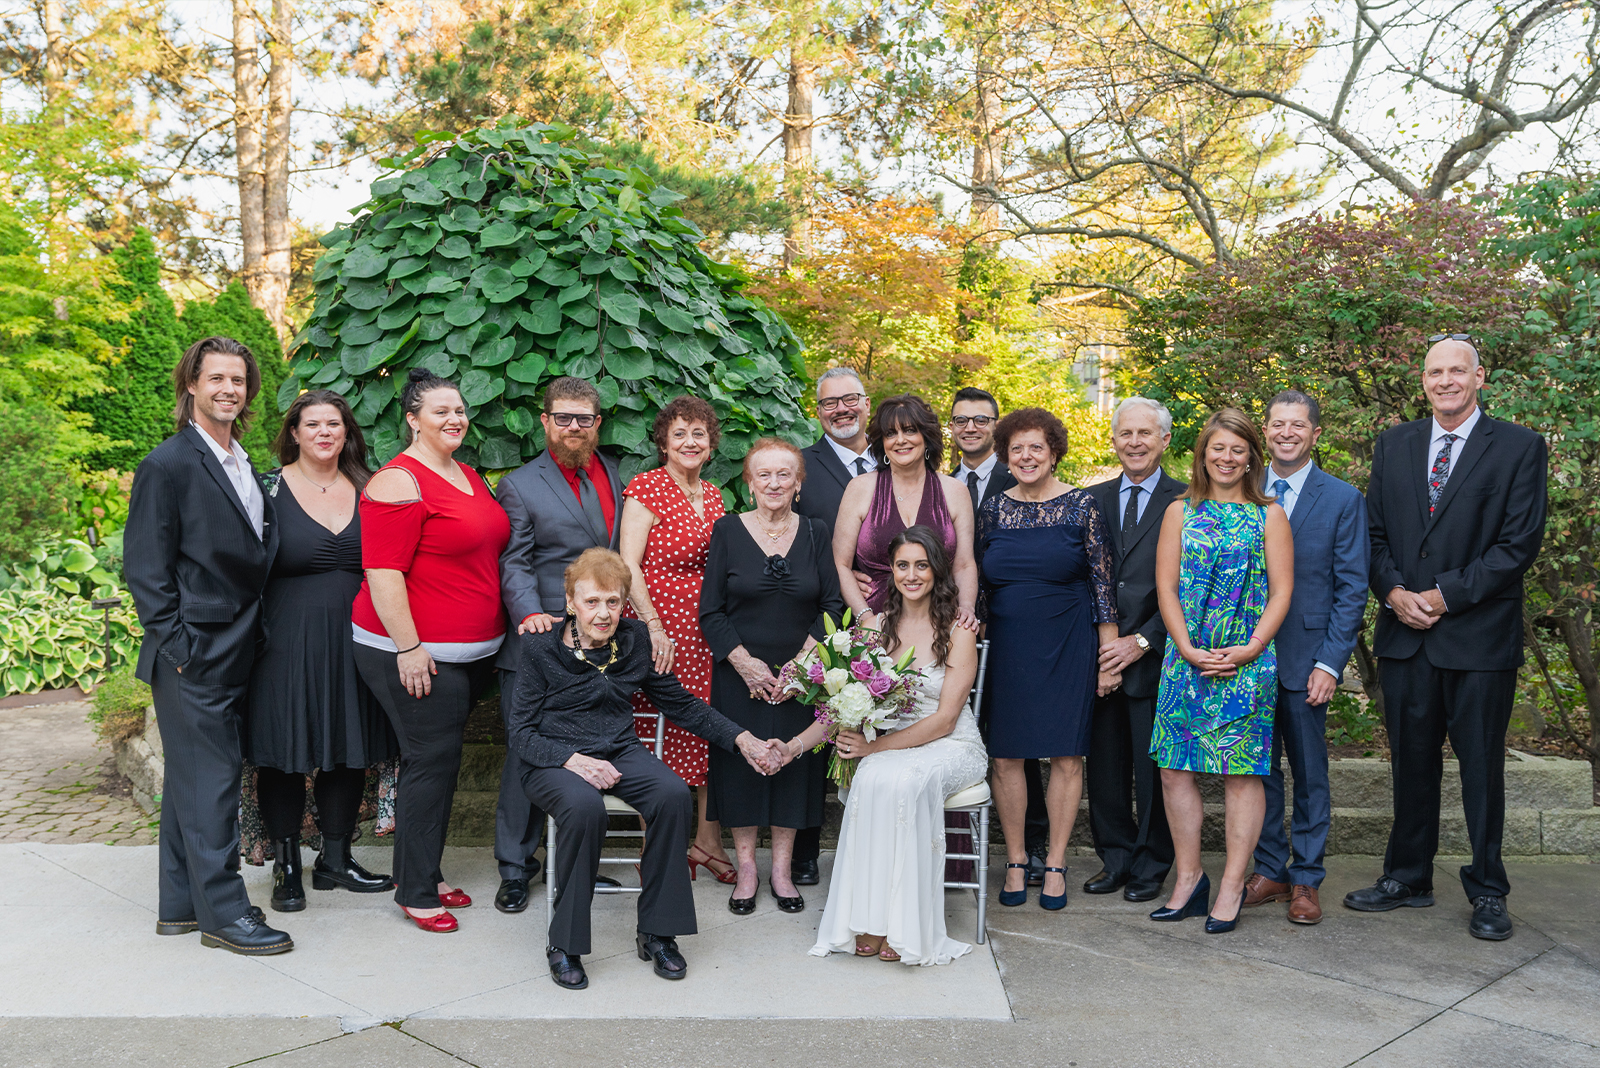 Bride and family, family portrait, wedding portrait, nature, green, trees, bushes, classy wedding ceremony at Landerhaven, Mayfield Heights OH